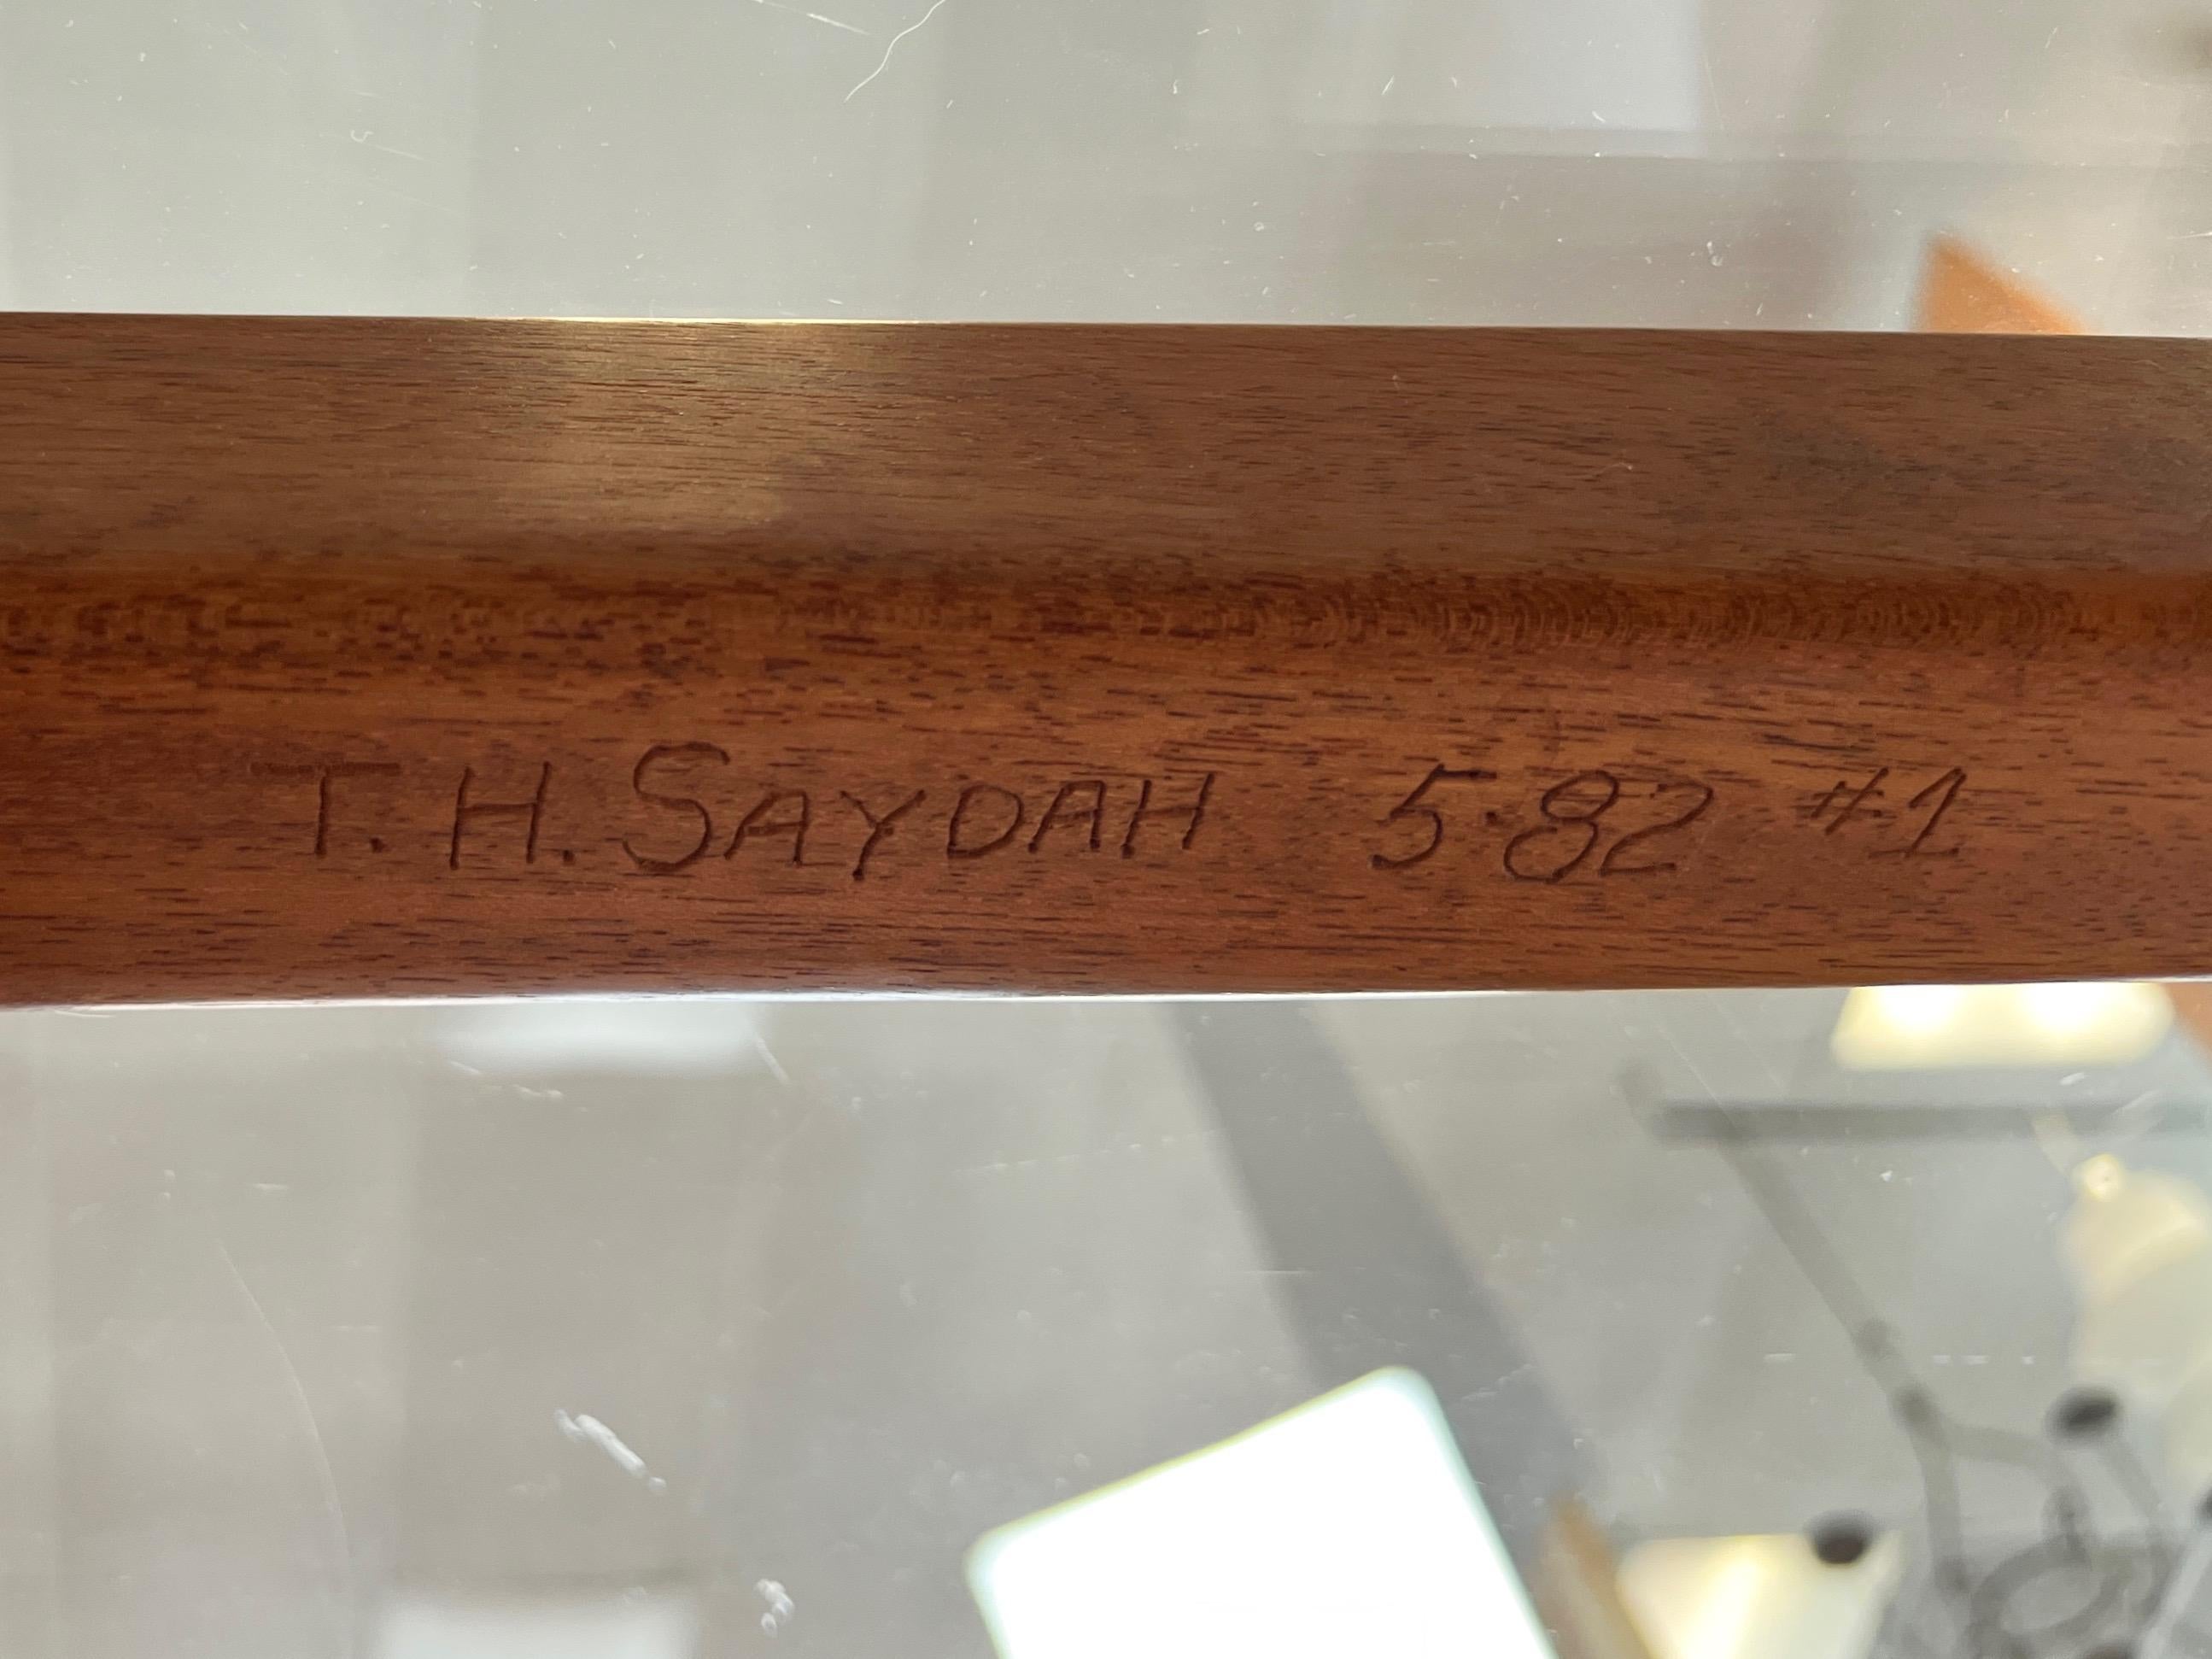 Thomas Saydah Large Walnut and Glass Coffee Table, Signed and Dated, 1982 For Sale 14